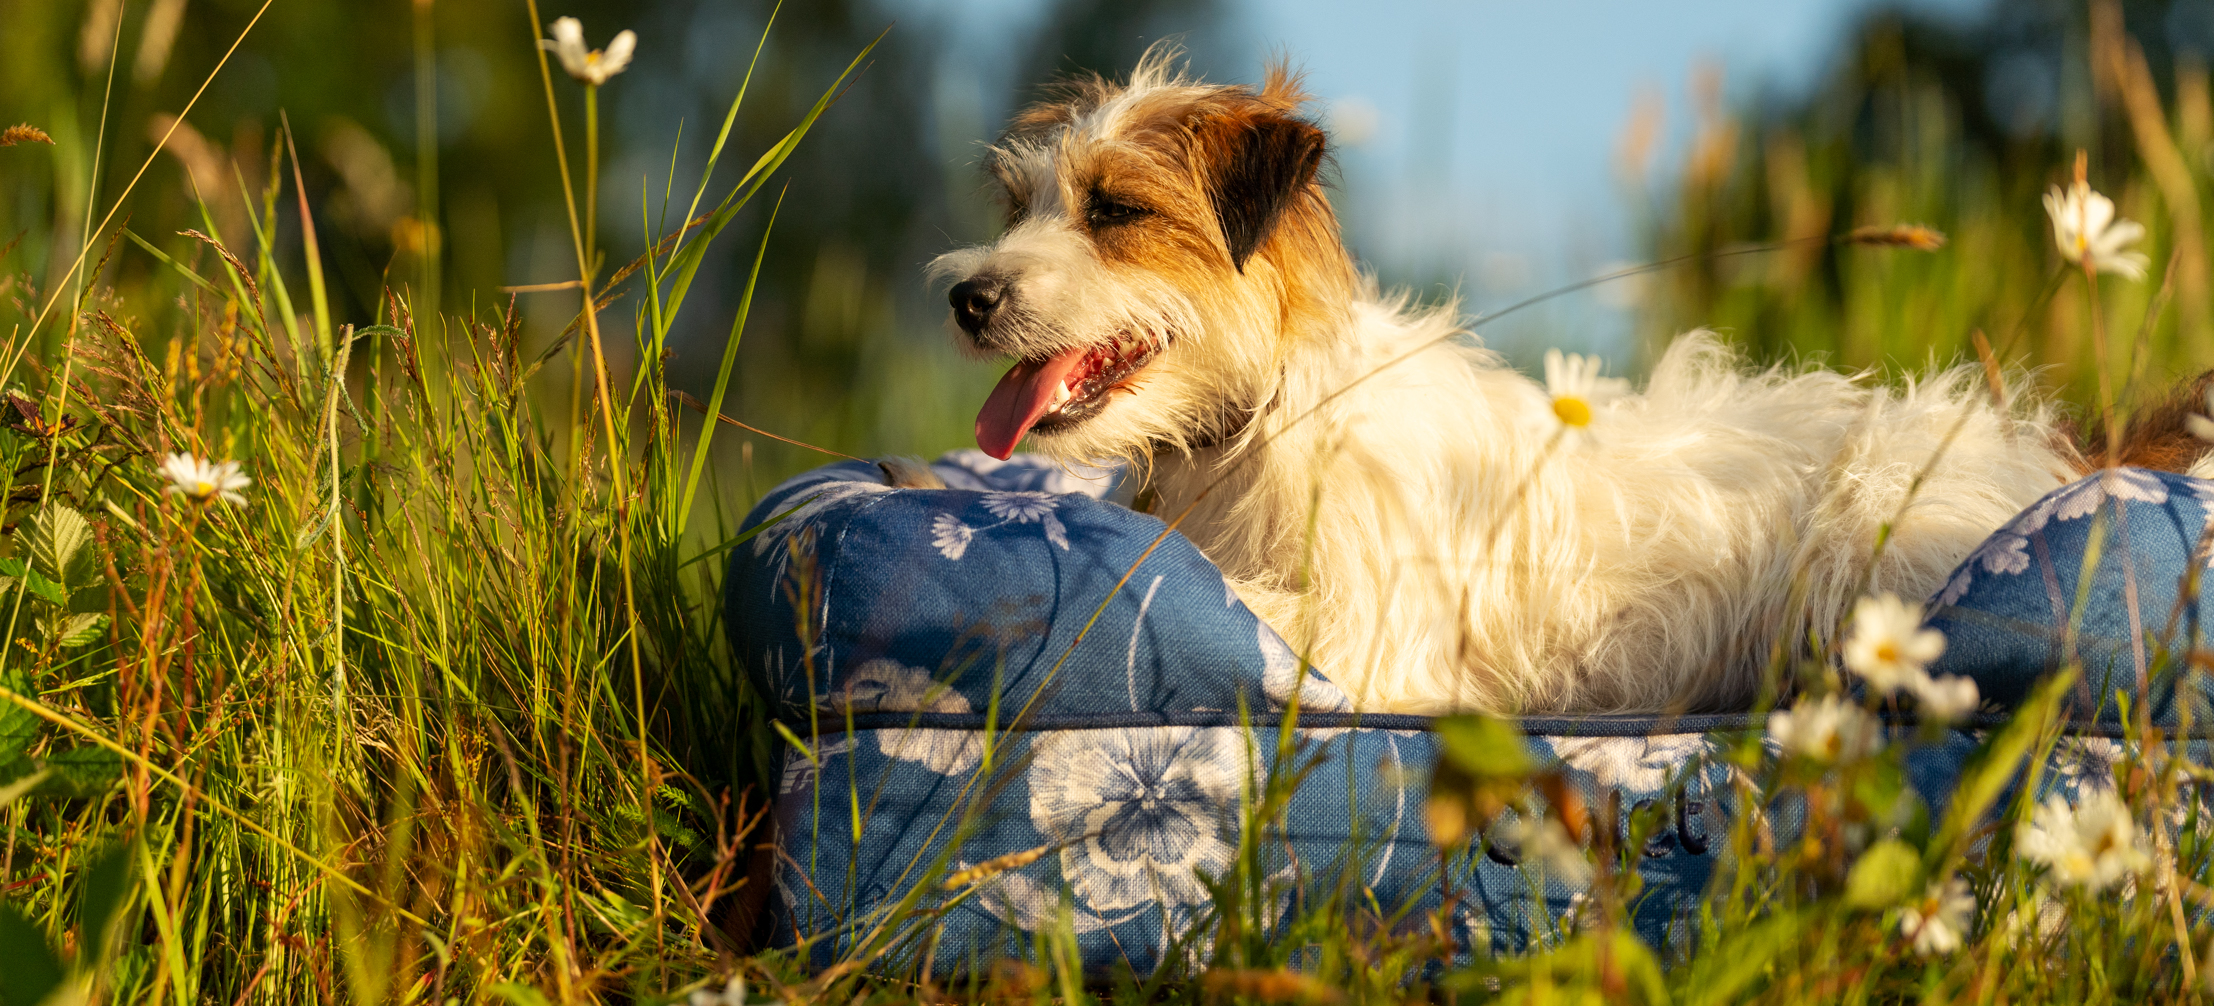 10 Must-have Products for New Dog Owners - The Pet Blog Lady